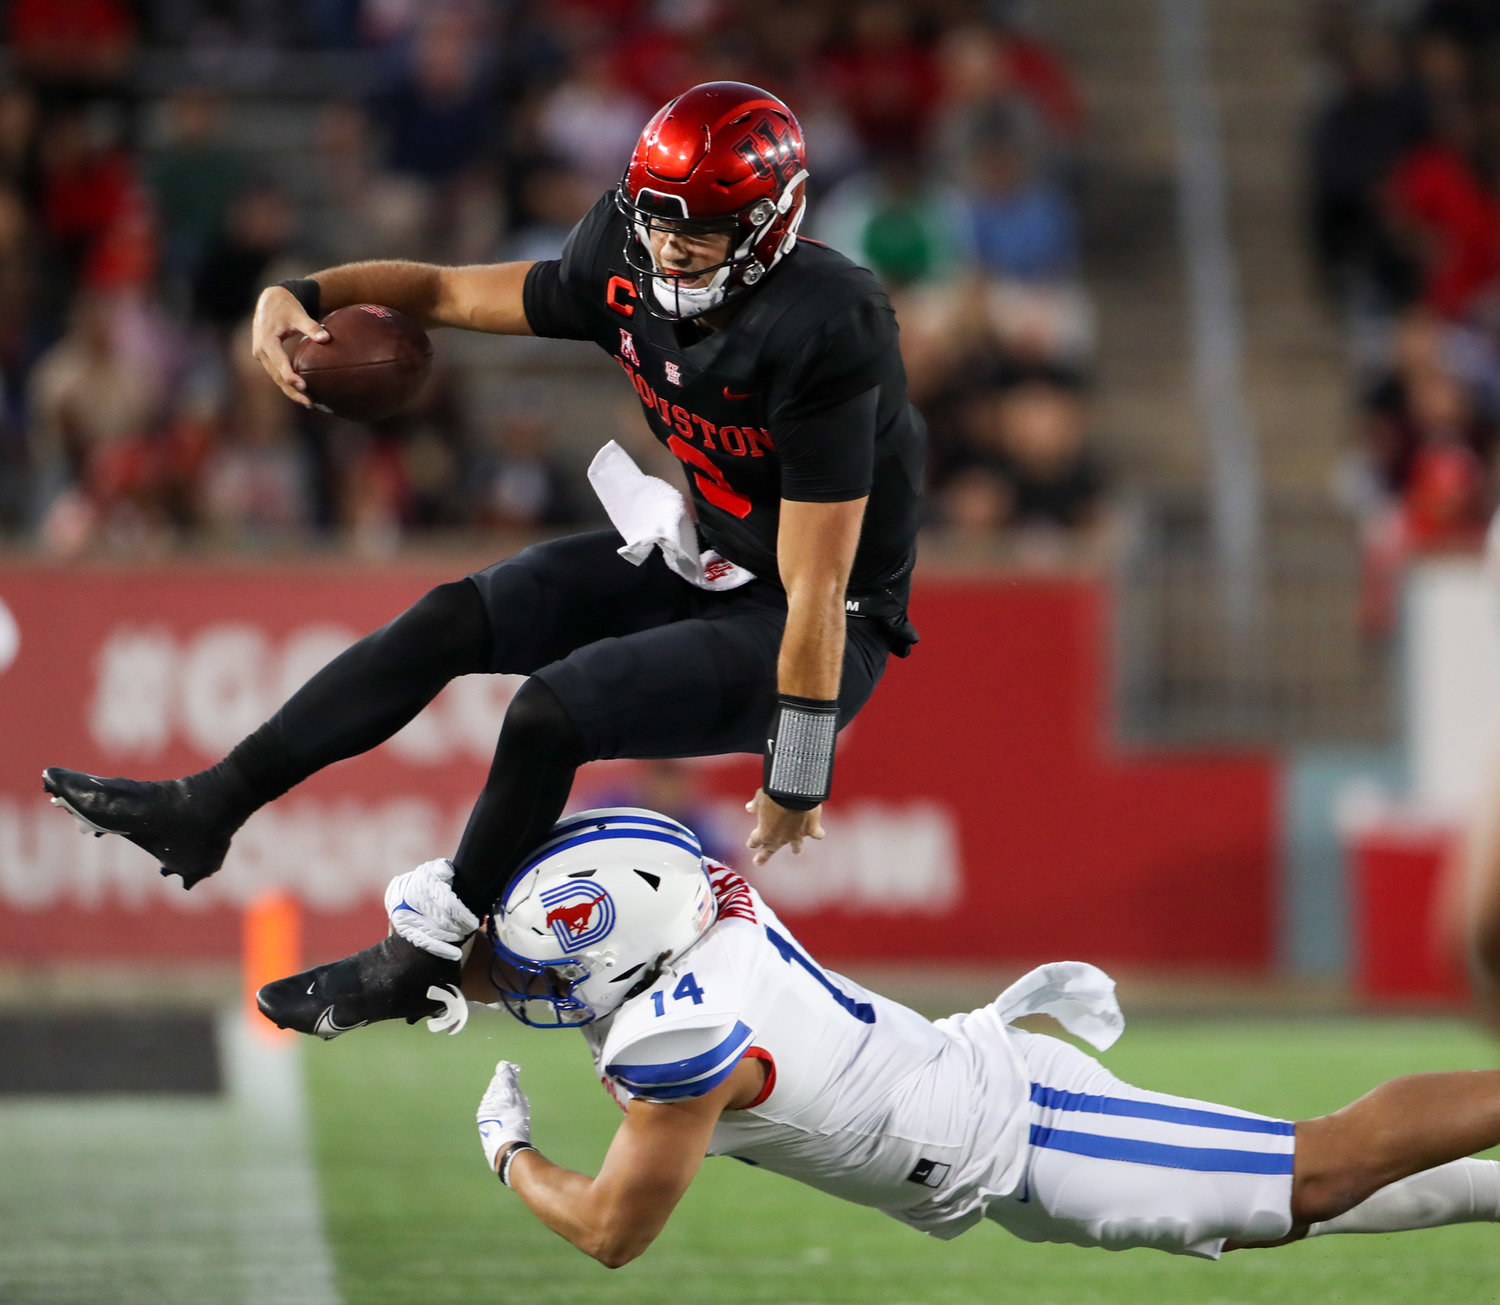 Houston Cougars quarterback Clayton Tune (3) leaps in an attempt to avoid the tackle attempt of SMU Mustangs linebacker Richard Moore (14) during an NCAA football game between Houston and SMU on October 30, 2021 in Houston, Texas.